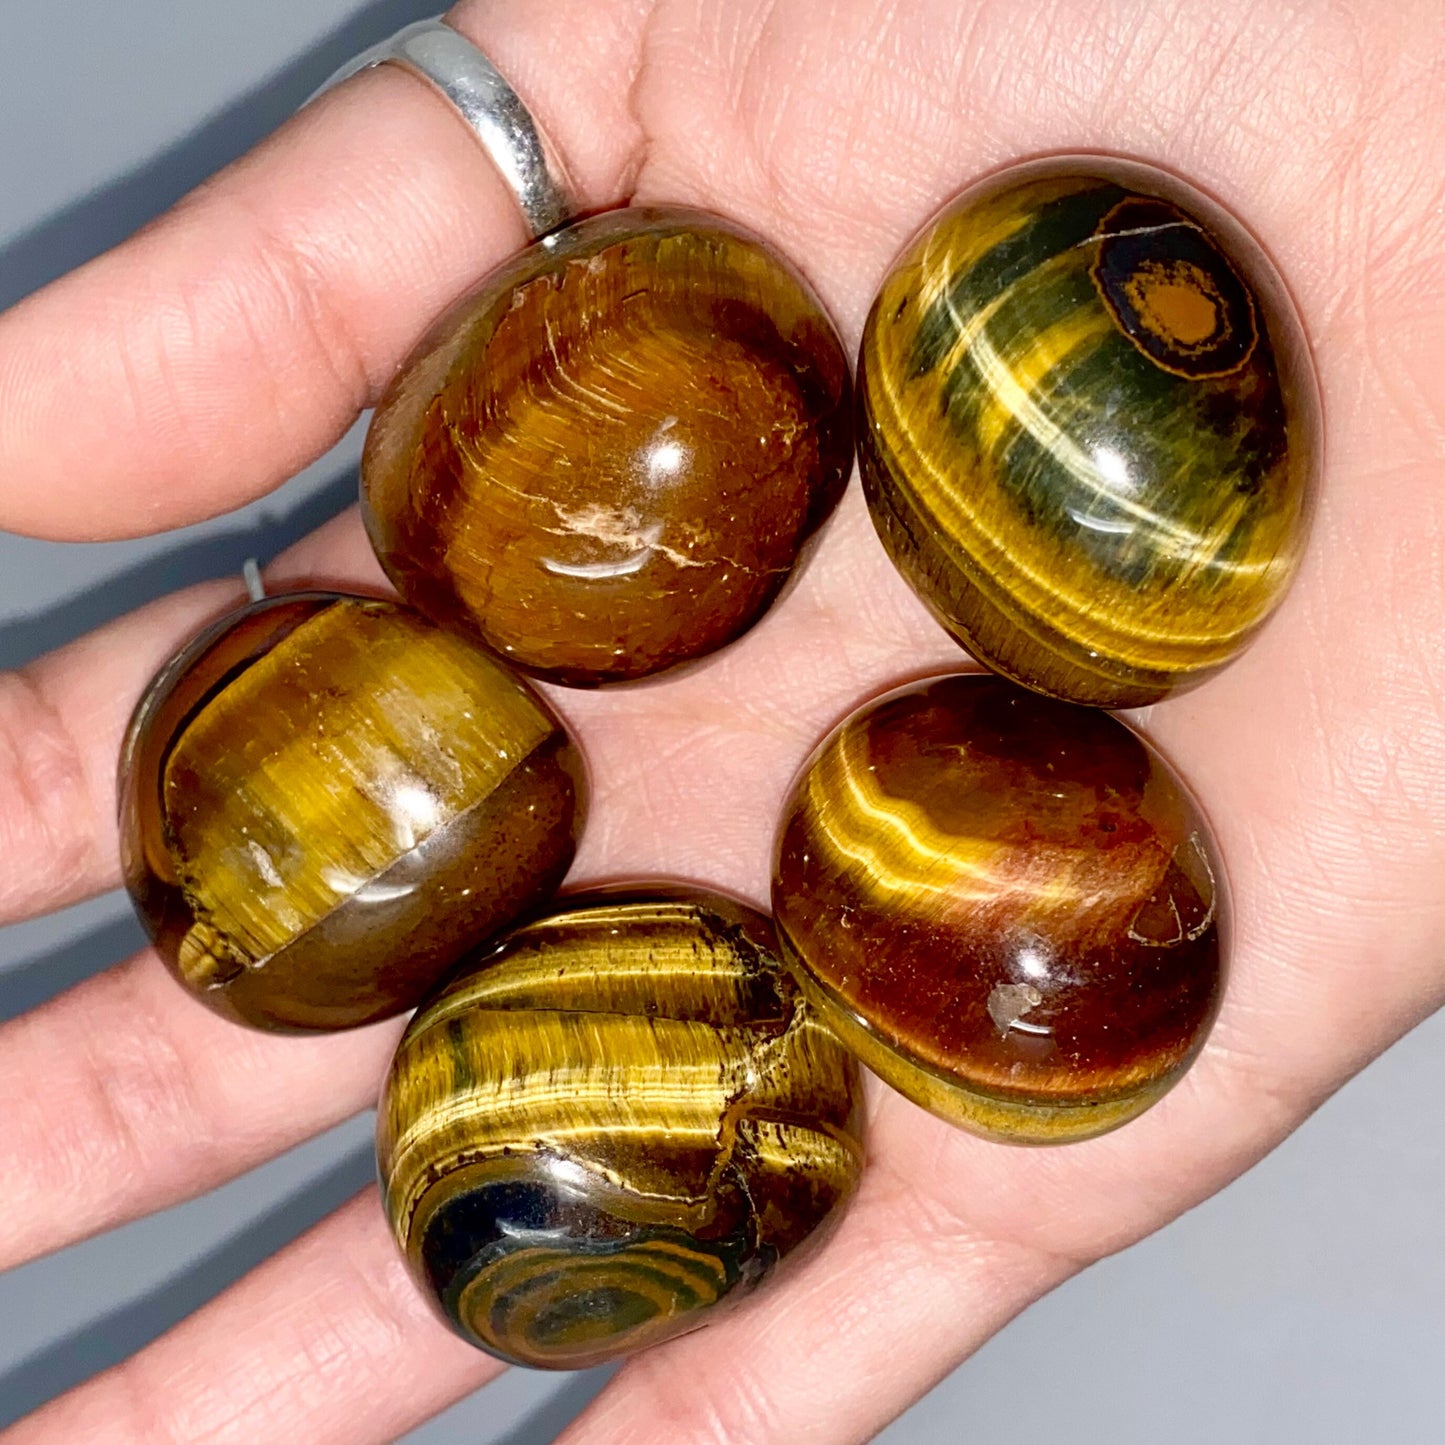 Polished High Quality Tigers Eye Tumbled Stone about 1-1.5 long Natural Tigers Eye Crystal /